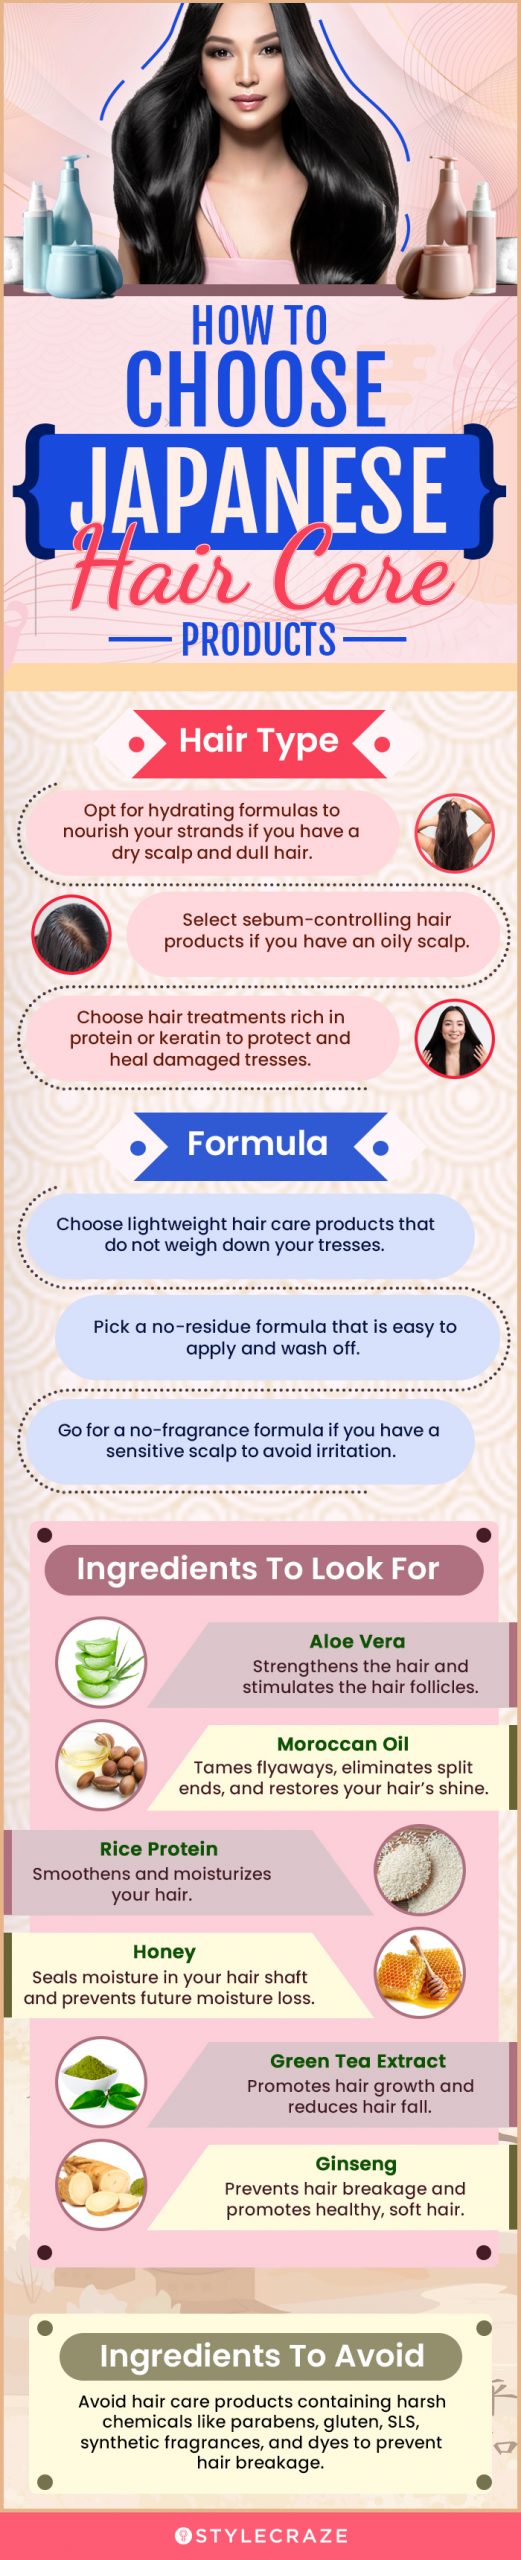 How To Choose Japanese Hair Care Products